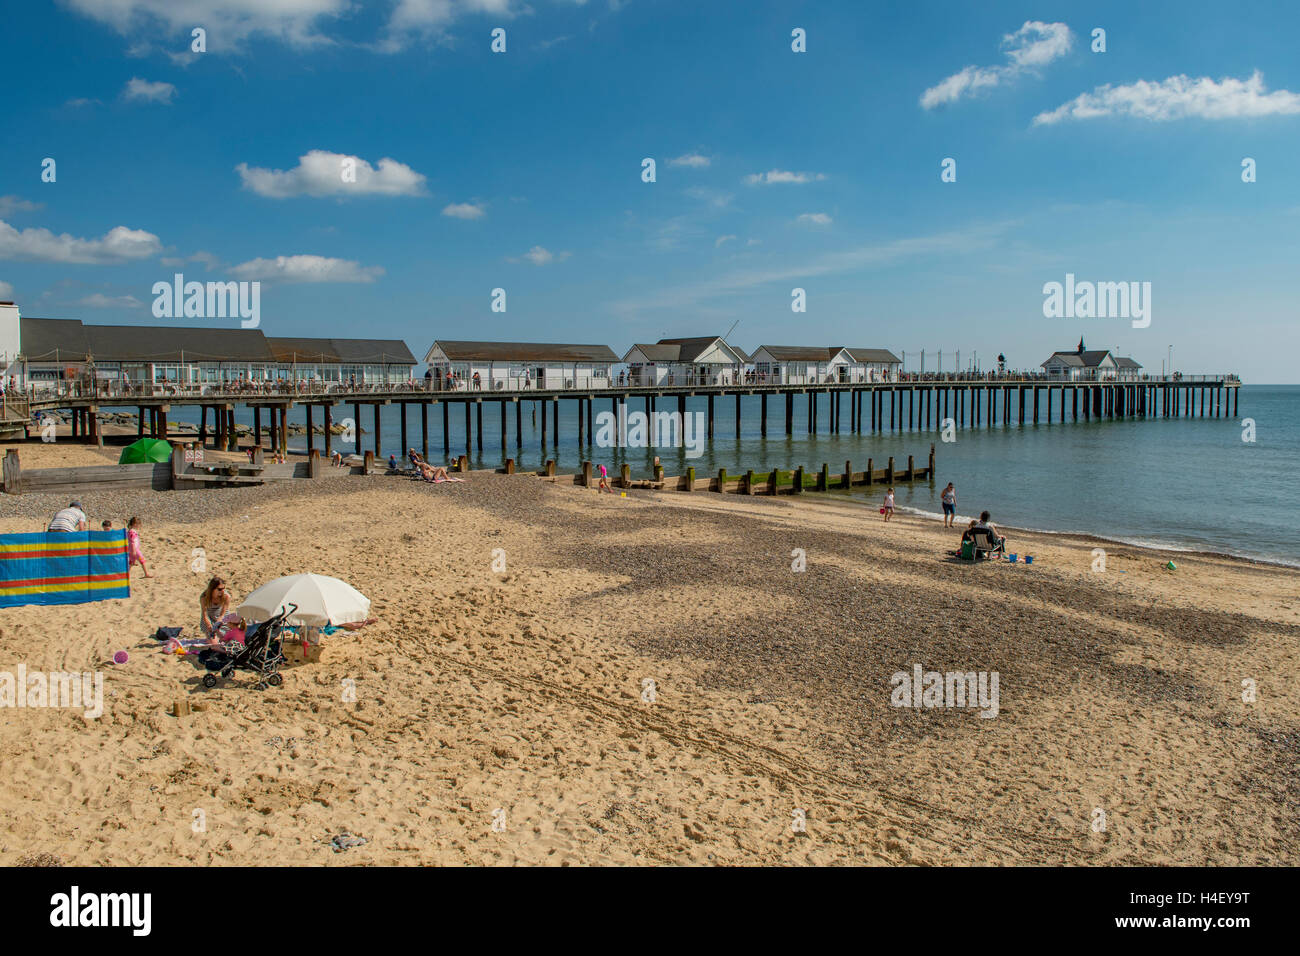 The Pier at Southwold, Suffolk, England Stock Photo